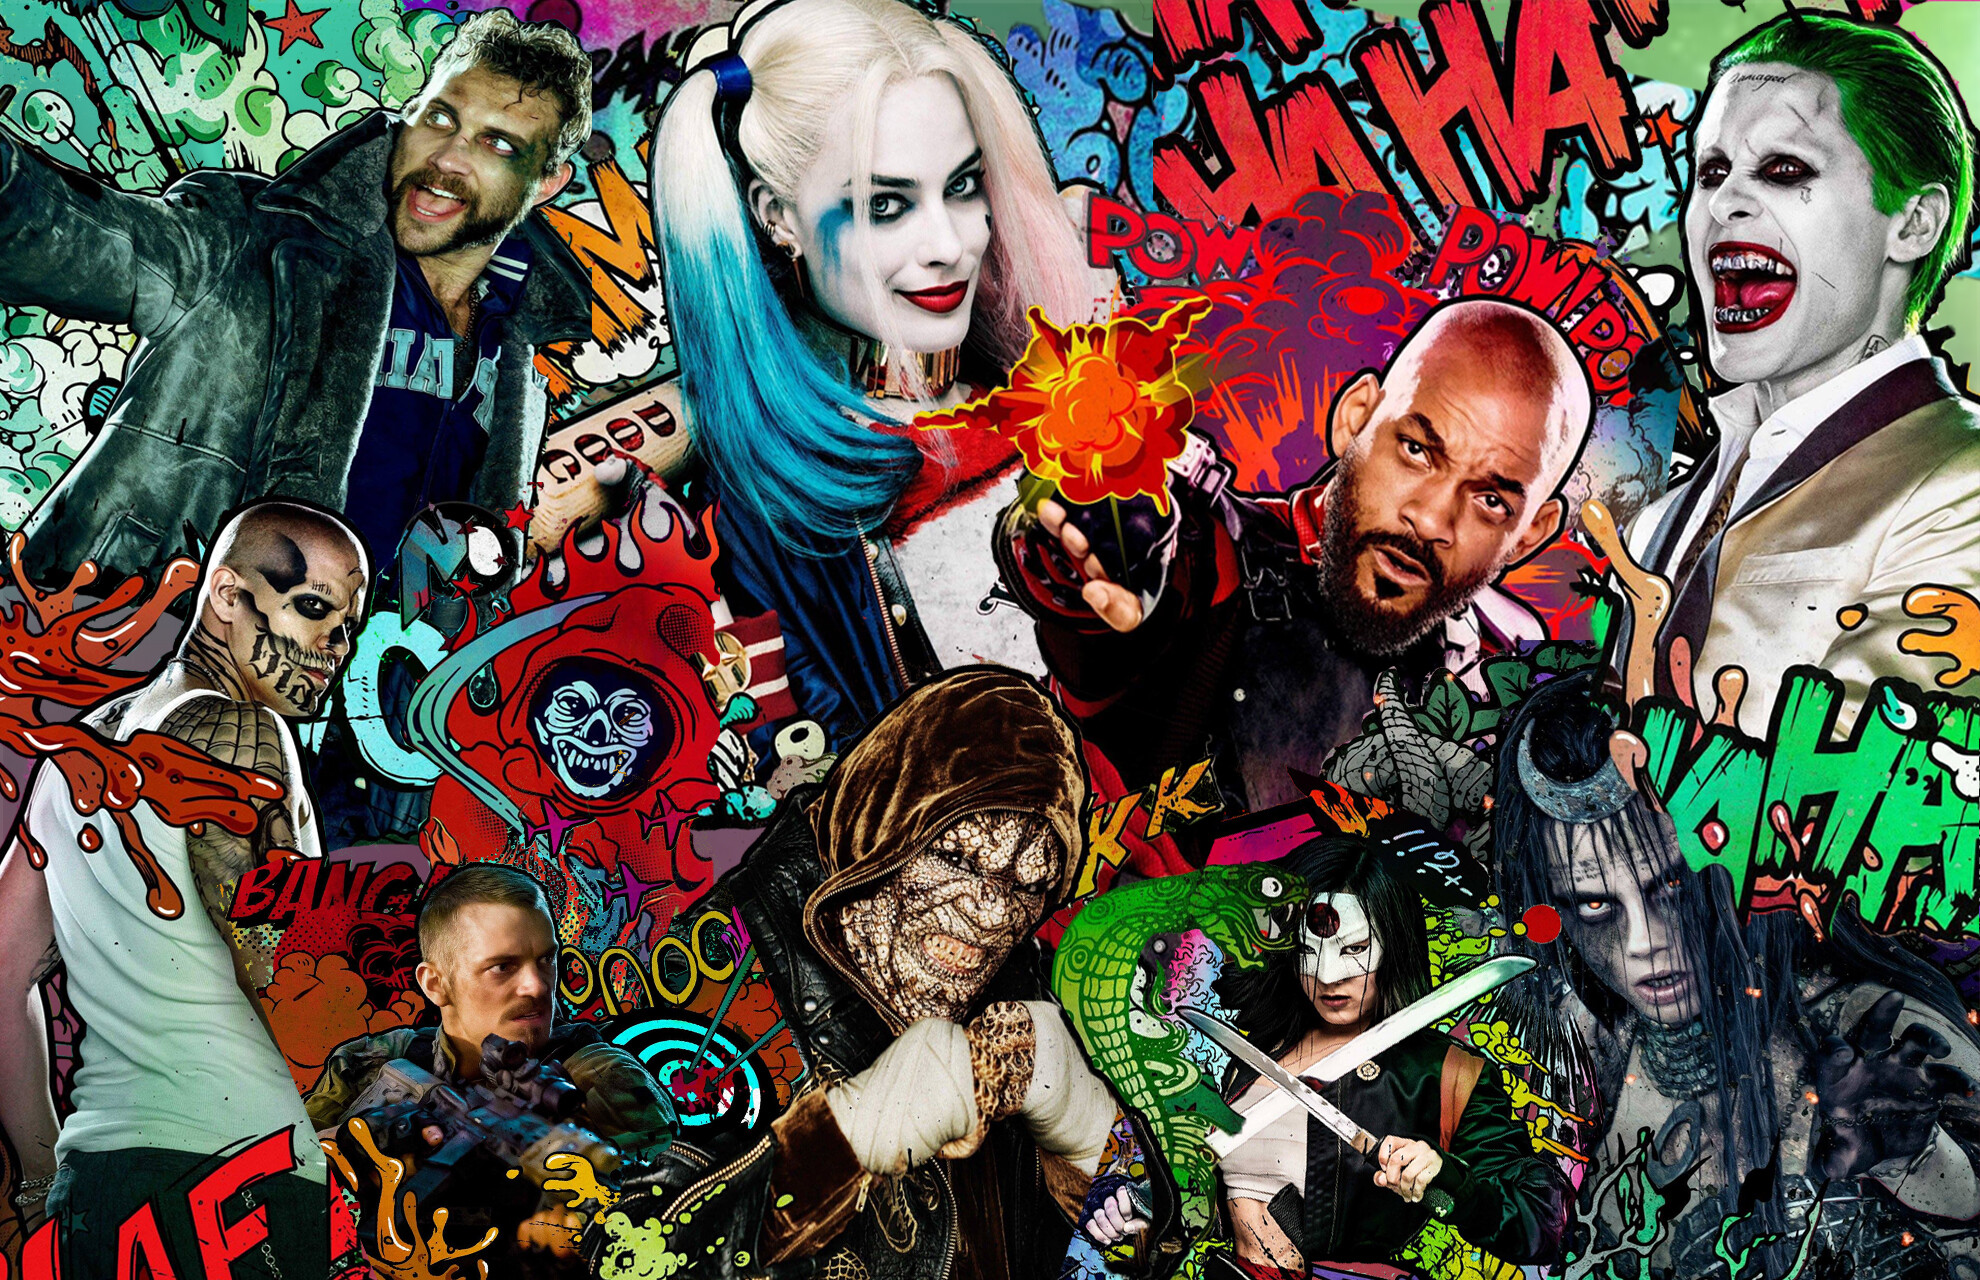 Suicide Squad: The film was nominated for and won multiple awards across various categories, including an Oscar for Best Makeup and Hairstyling at the 89th Academy Awards. 1980x1280 HD Background.